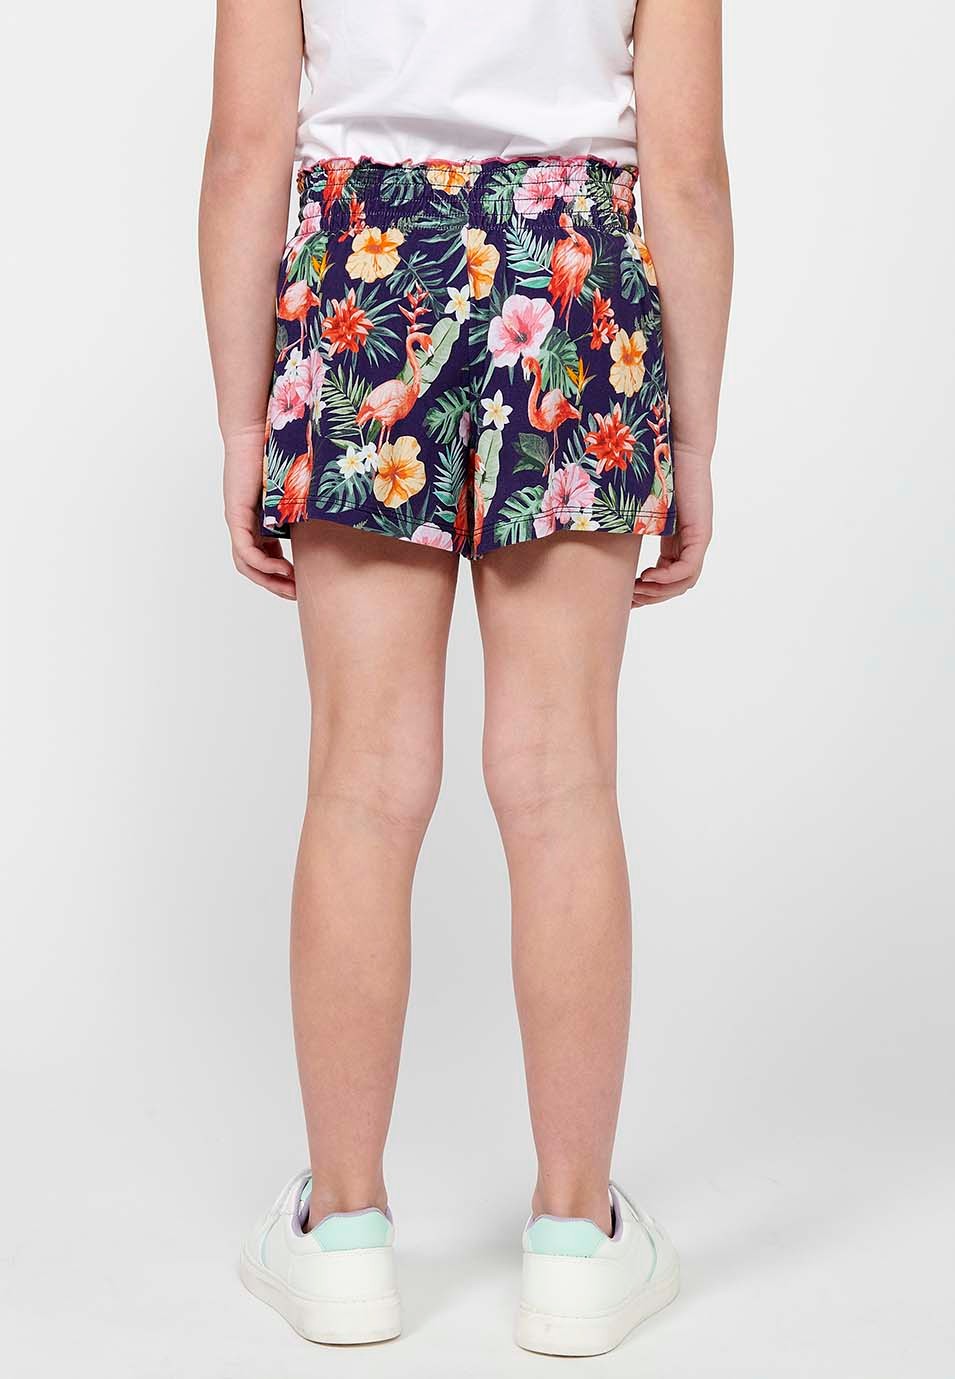 Pack of two shorts, one of them with a floral print and both with a wide elastic waistband and Multicolor drawstring for Girls 8